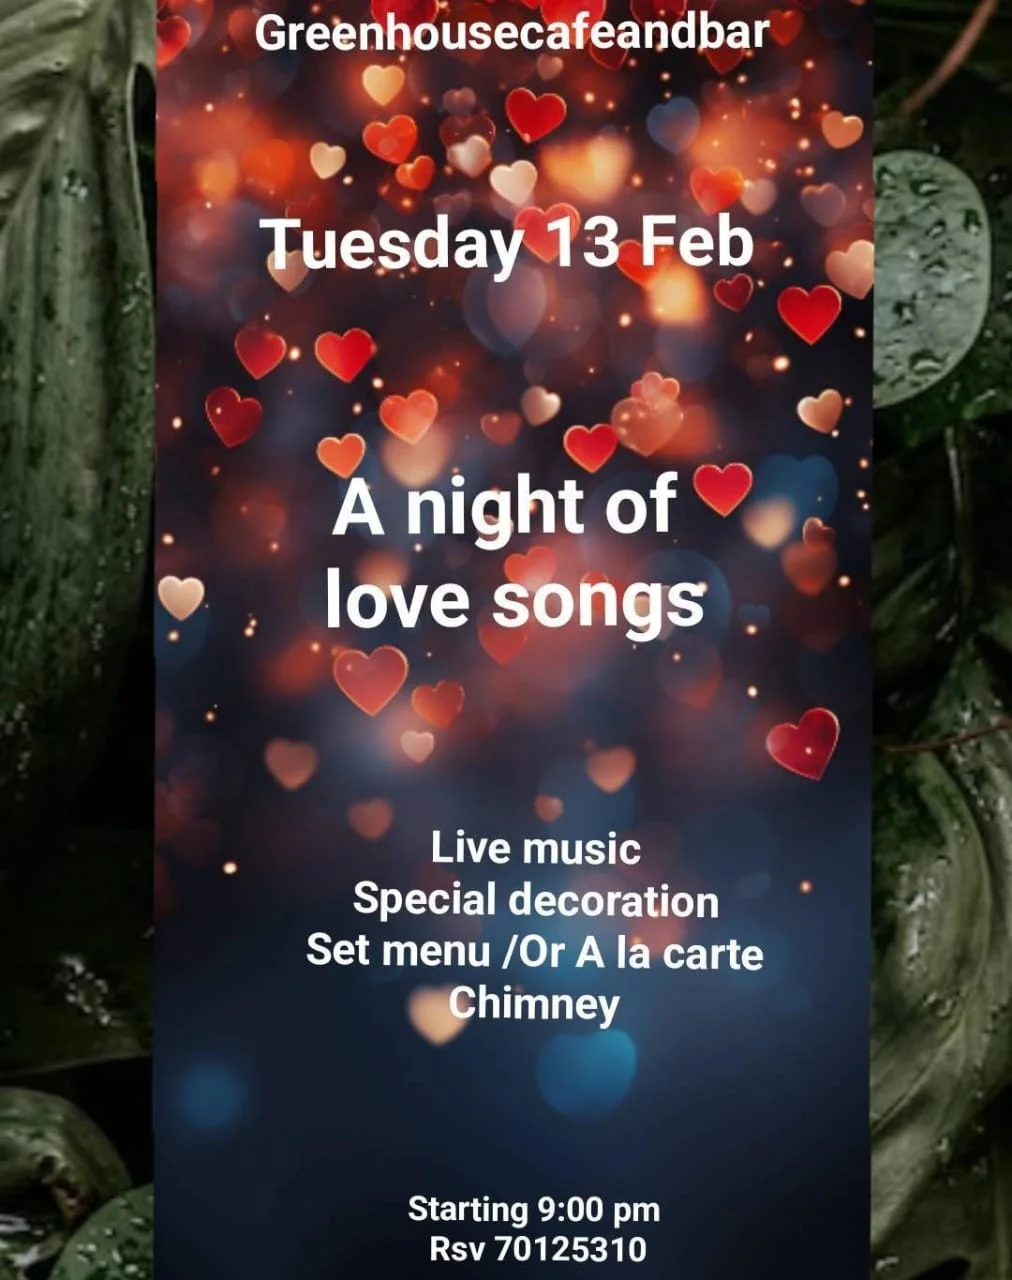 A Night for Love Song at Greenhouse